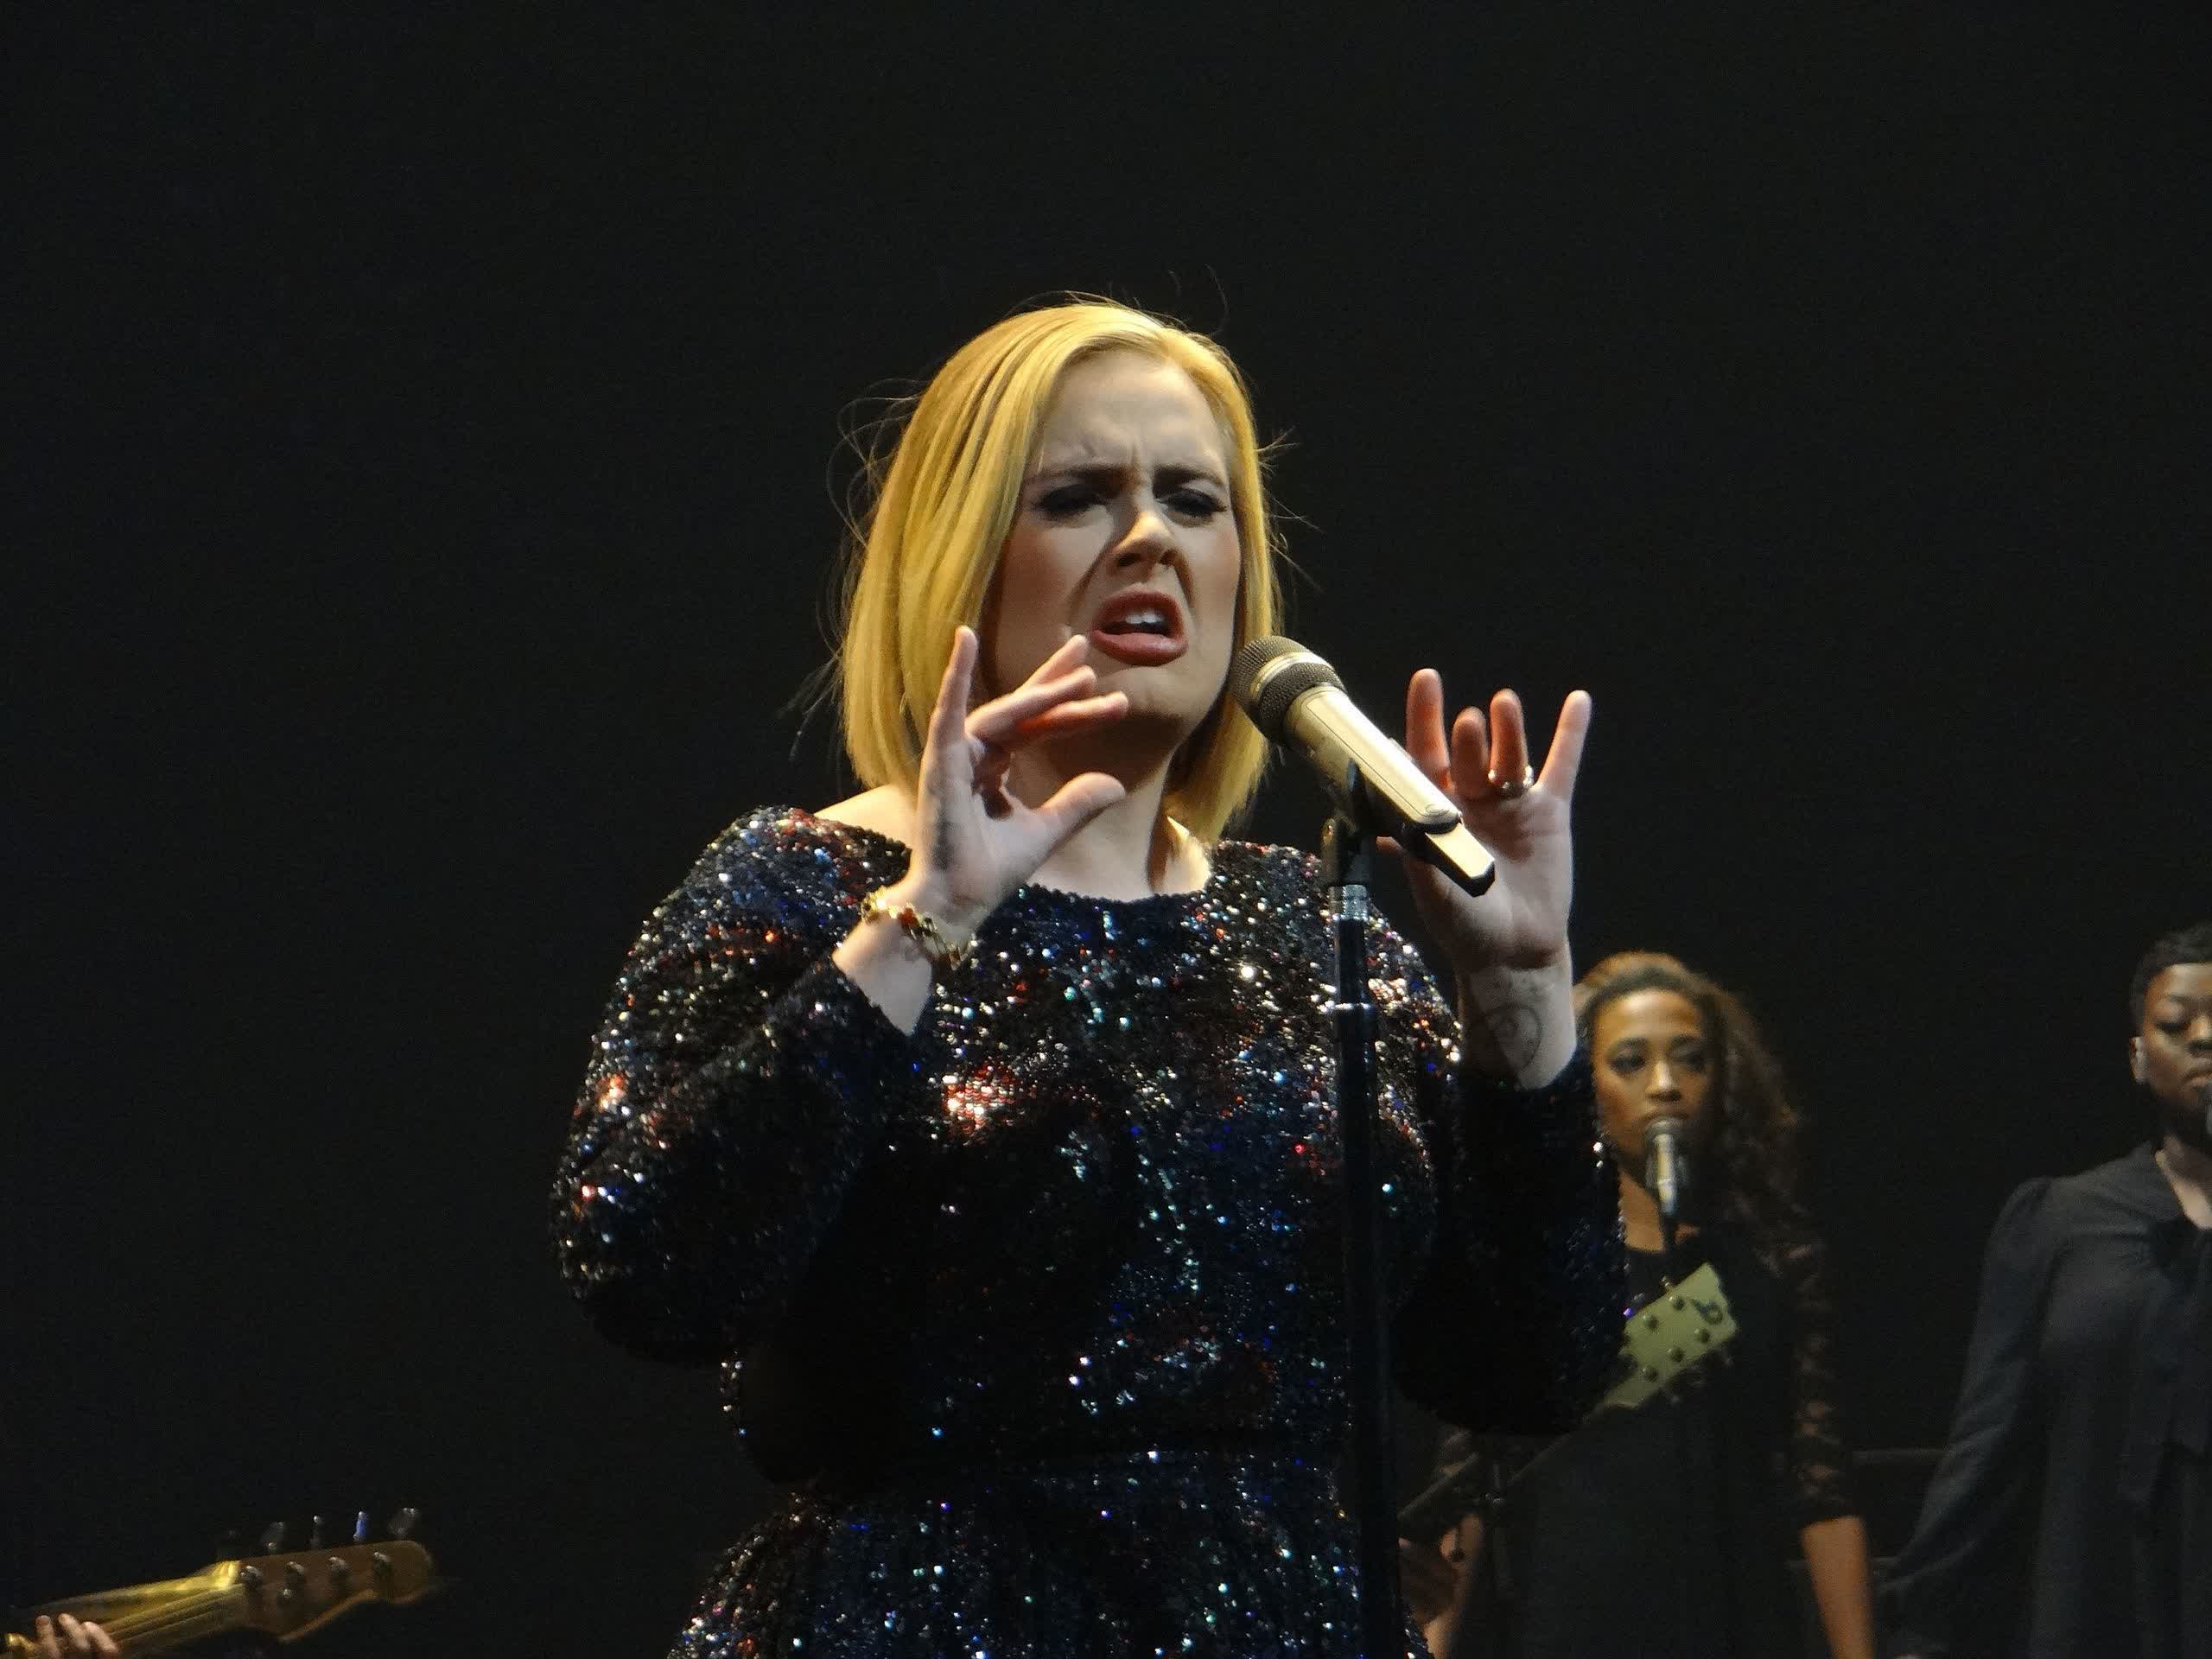 Spotify stops shuffling album tracks by default after Adele requests the change